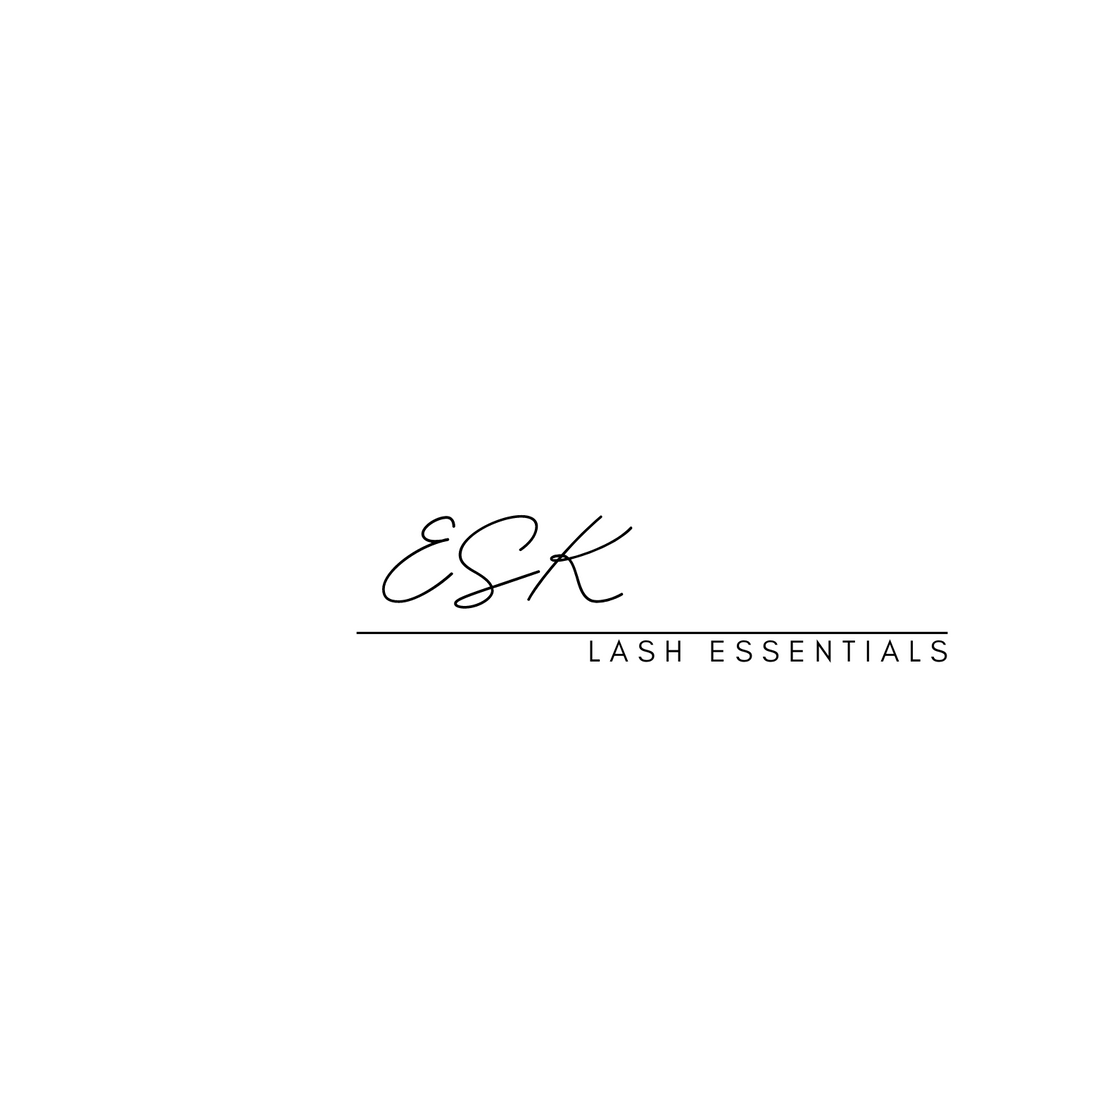  Up your Lash Game With ESK Lash Extension Essentials Tweezers! | ESK eyelash extension products and supplies